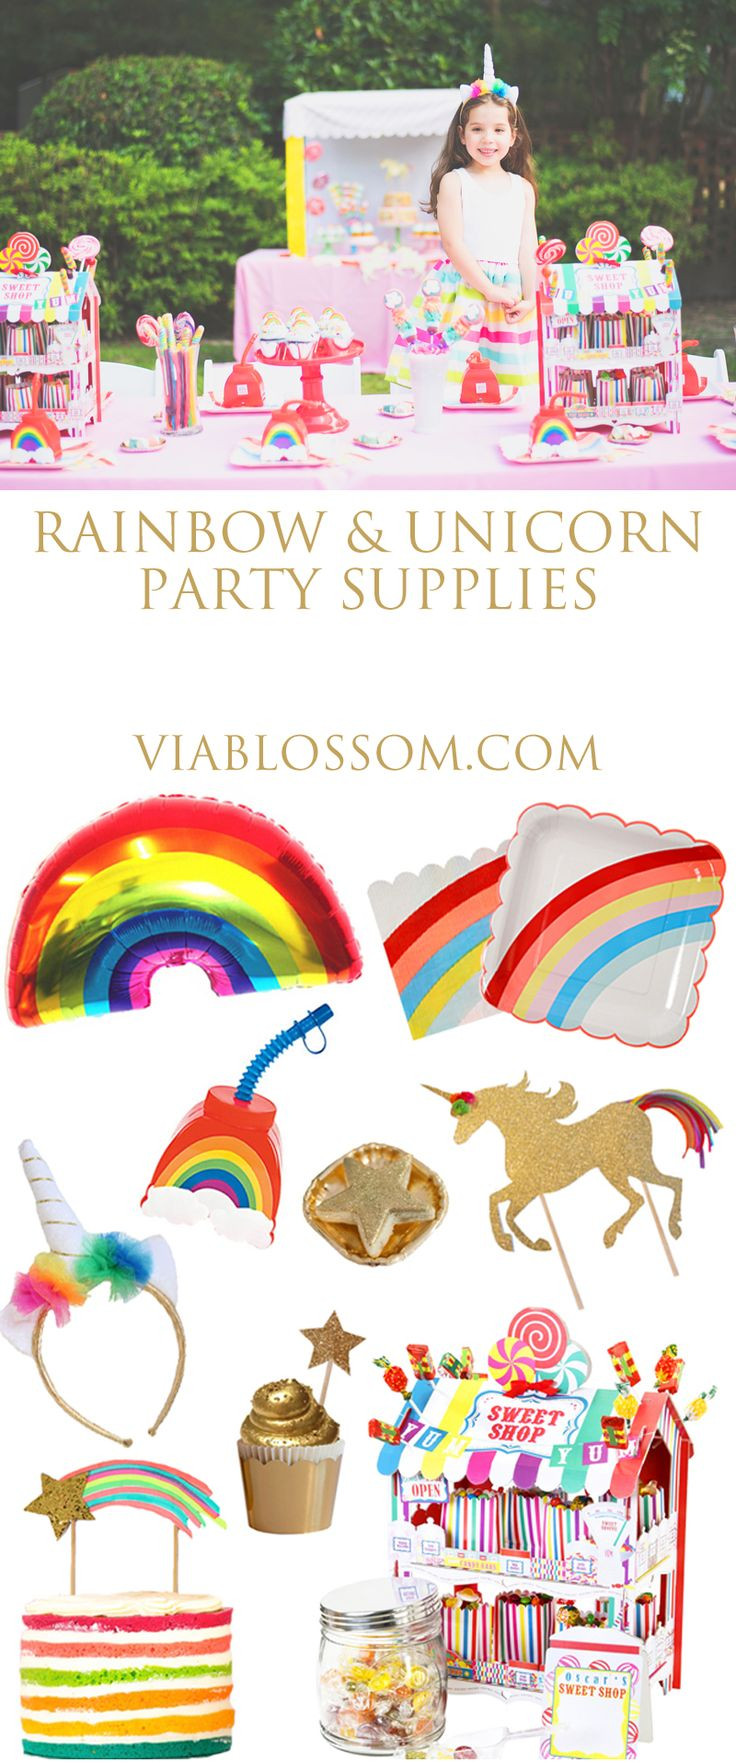 Rainbows And Unicorns Pool Party Ideas
 83 best images about Rainbow and Unicorn Party Ideas on